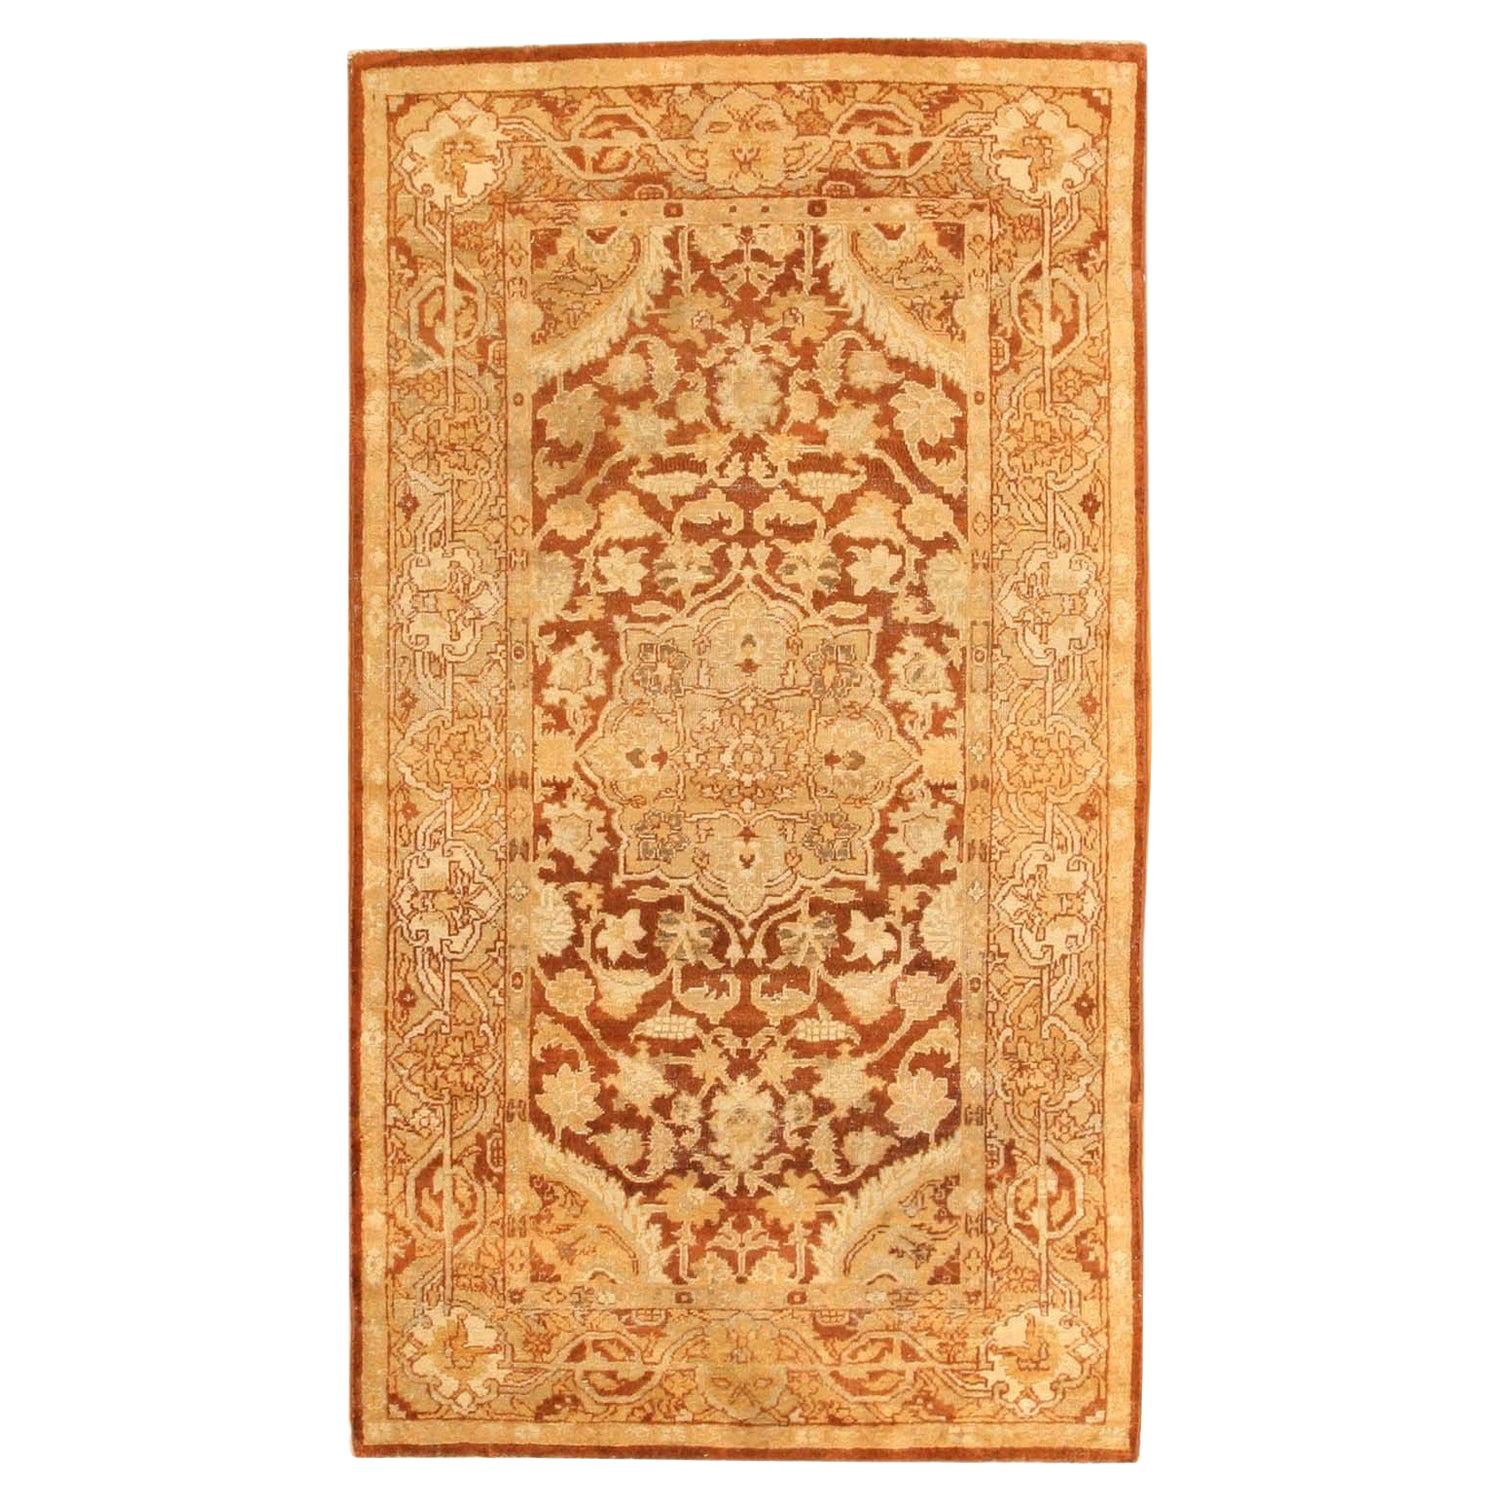 Tapis Amritsar indien ancien. 4 pieds x 7 pieds 2 po.